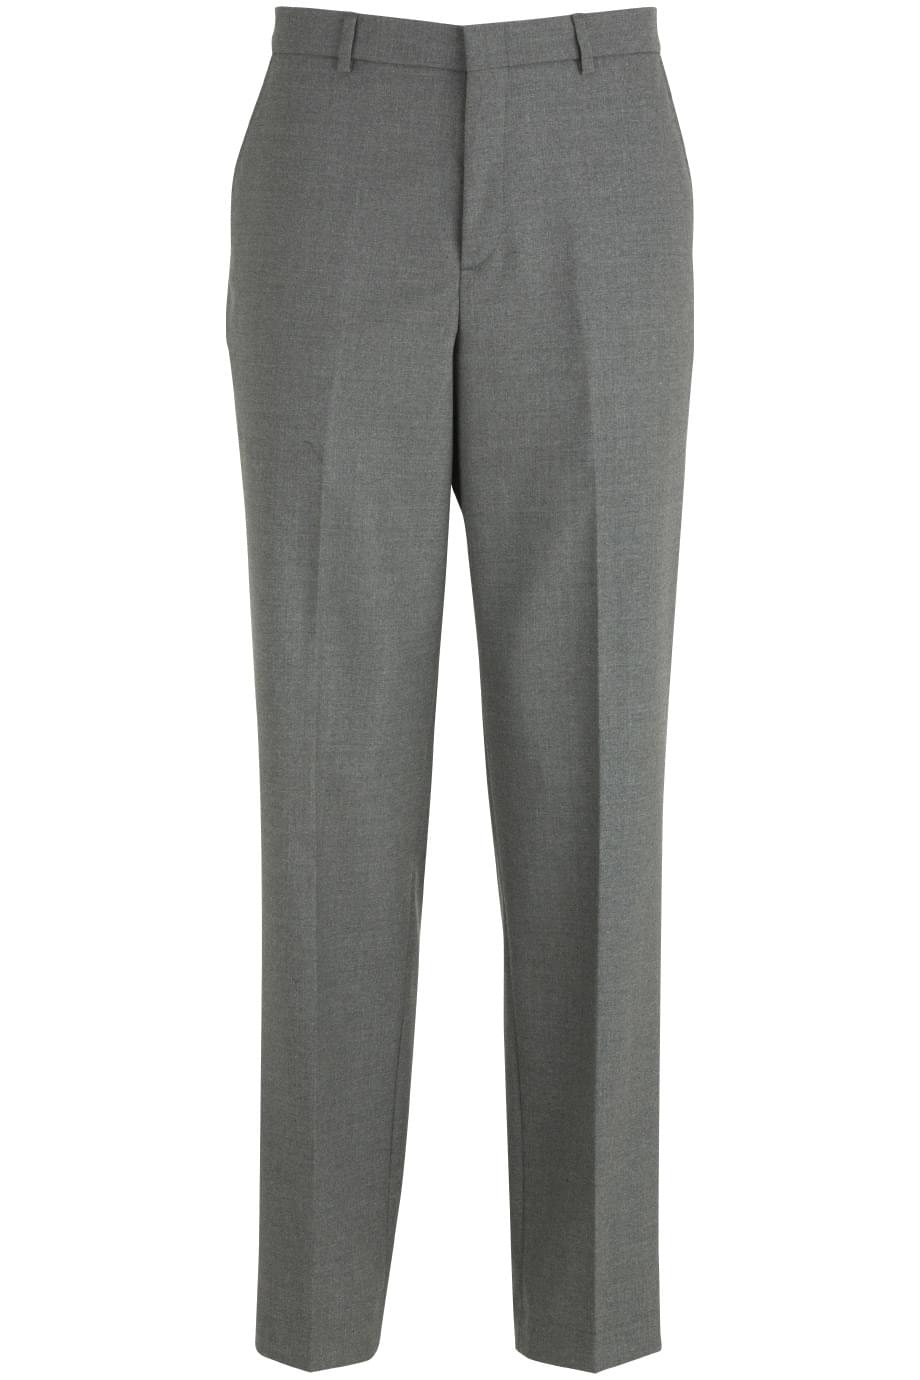 Men's Washable Wool Flat Front Pant- Replacing Intaglio